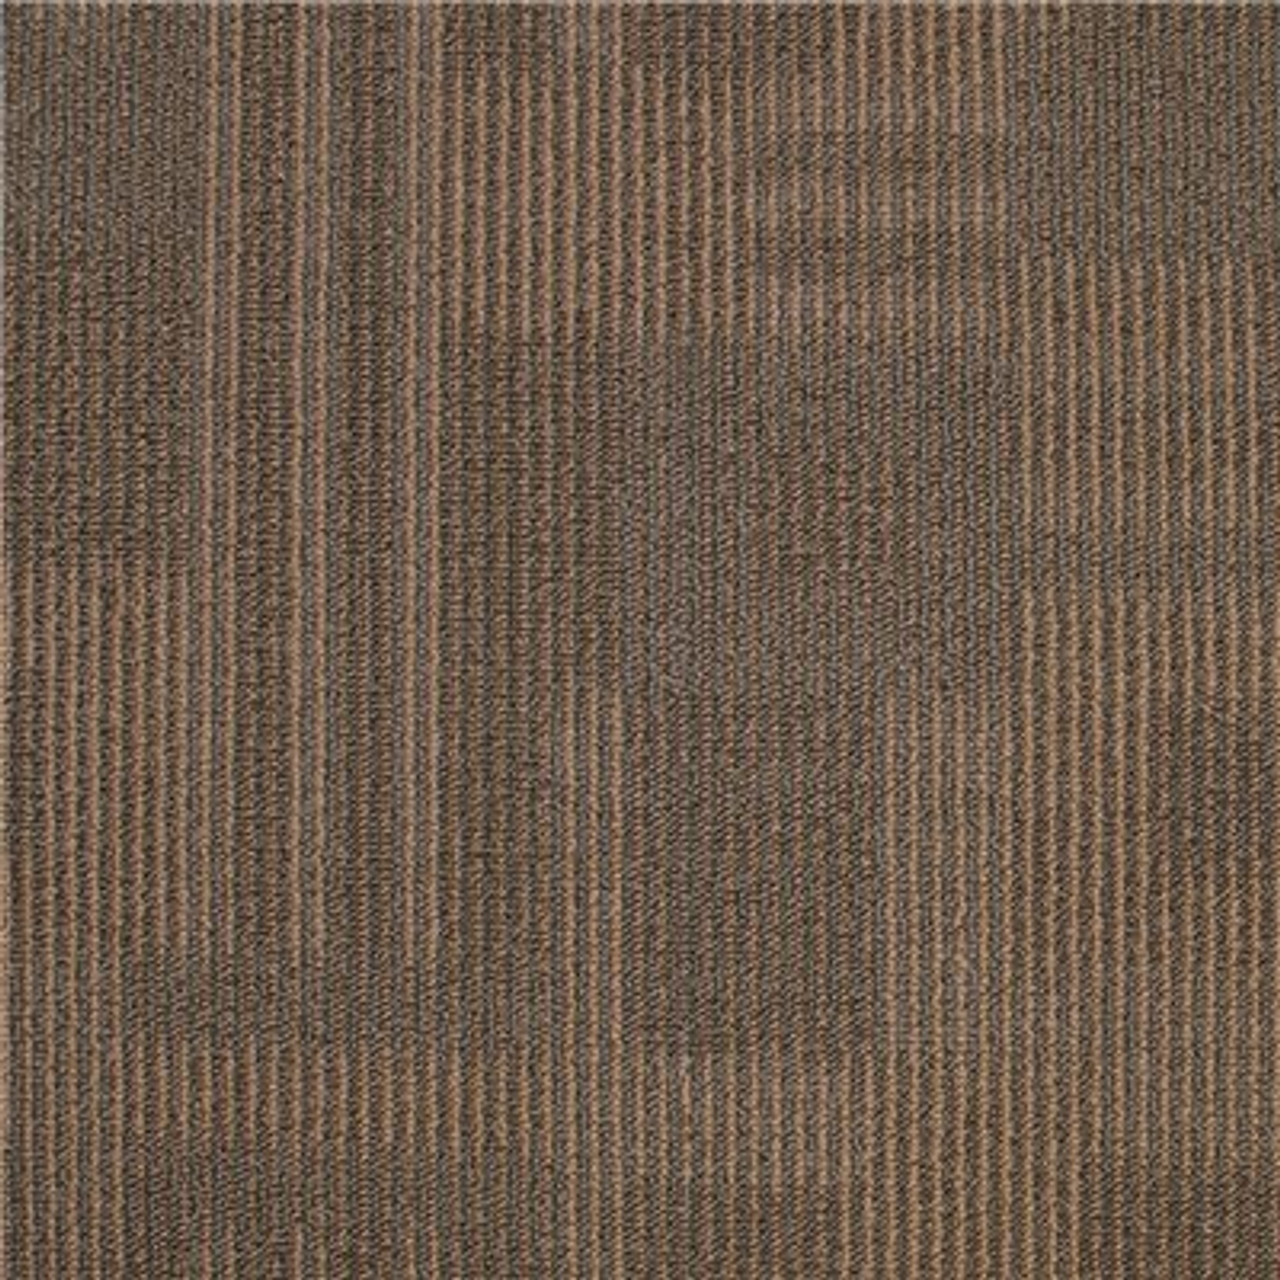 Board of Directors Brown Residential/Commercial 19.7 in. x 19.7 Glue-Down Carpet Tile (20 Tiles/Case) 54 sq. ft.